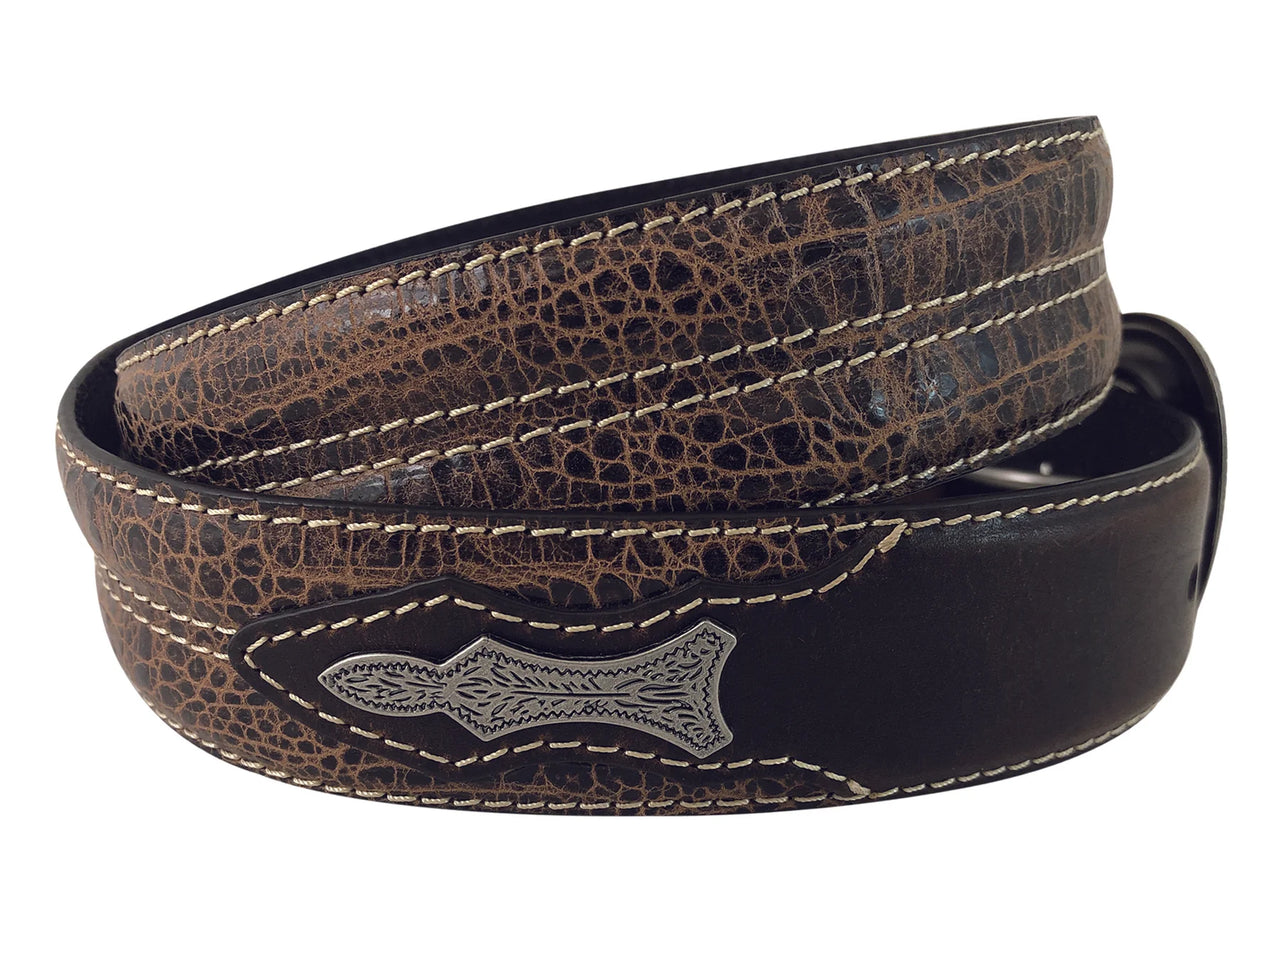 Roper Mens Bambino Belt Genuine Leather - The Trading Stables